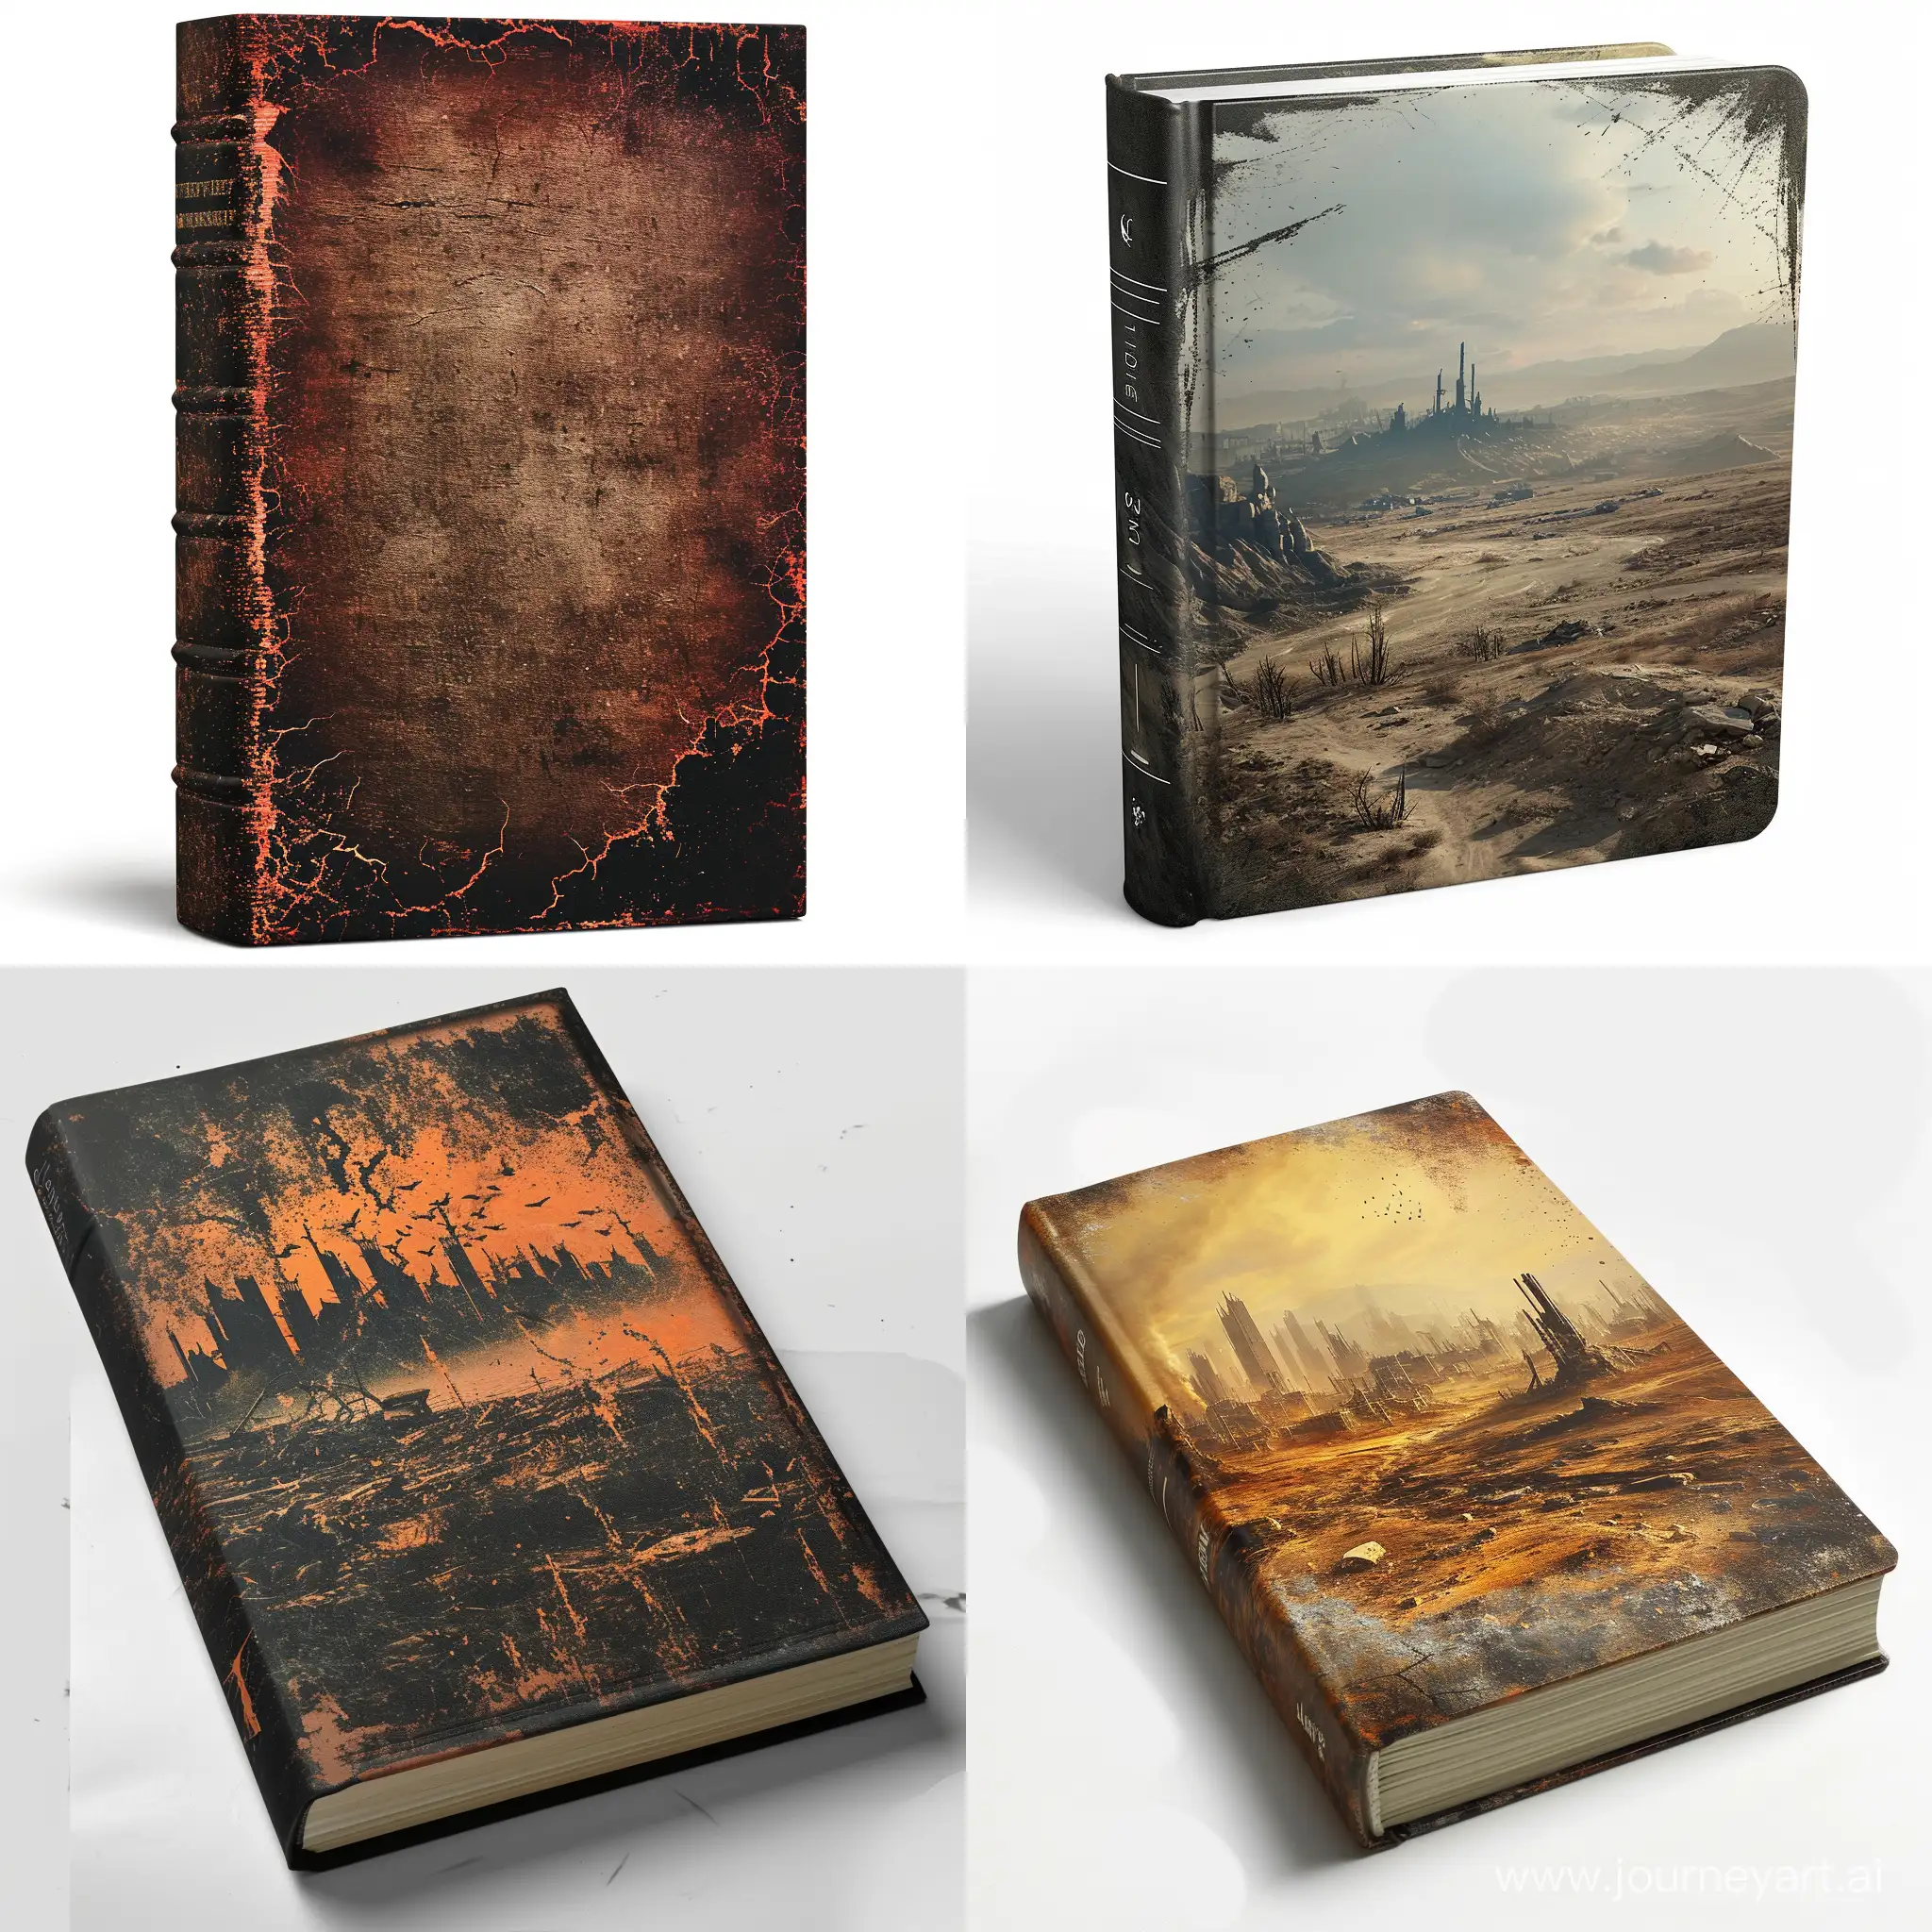 PostApocalyptic-Book-Cover-with-Vast-Desolation-Version-6